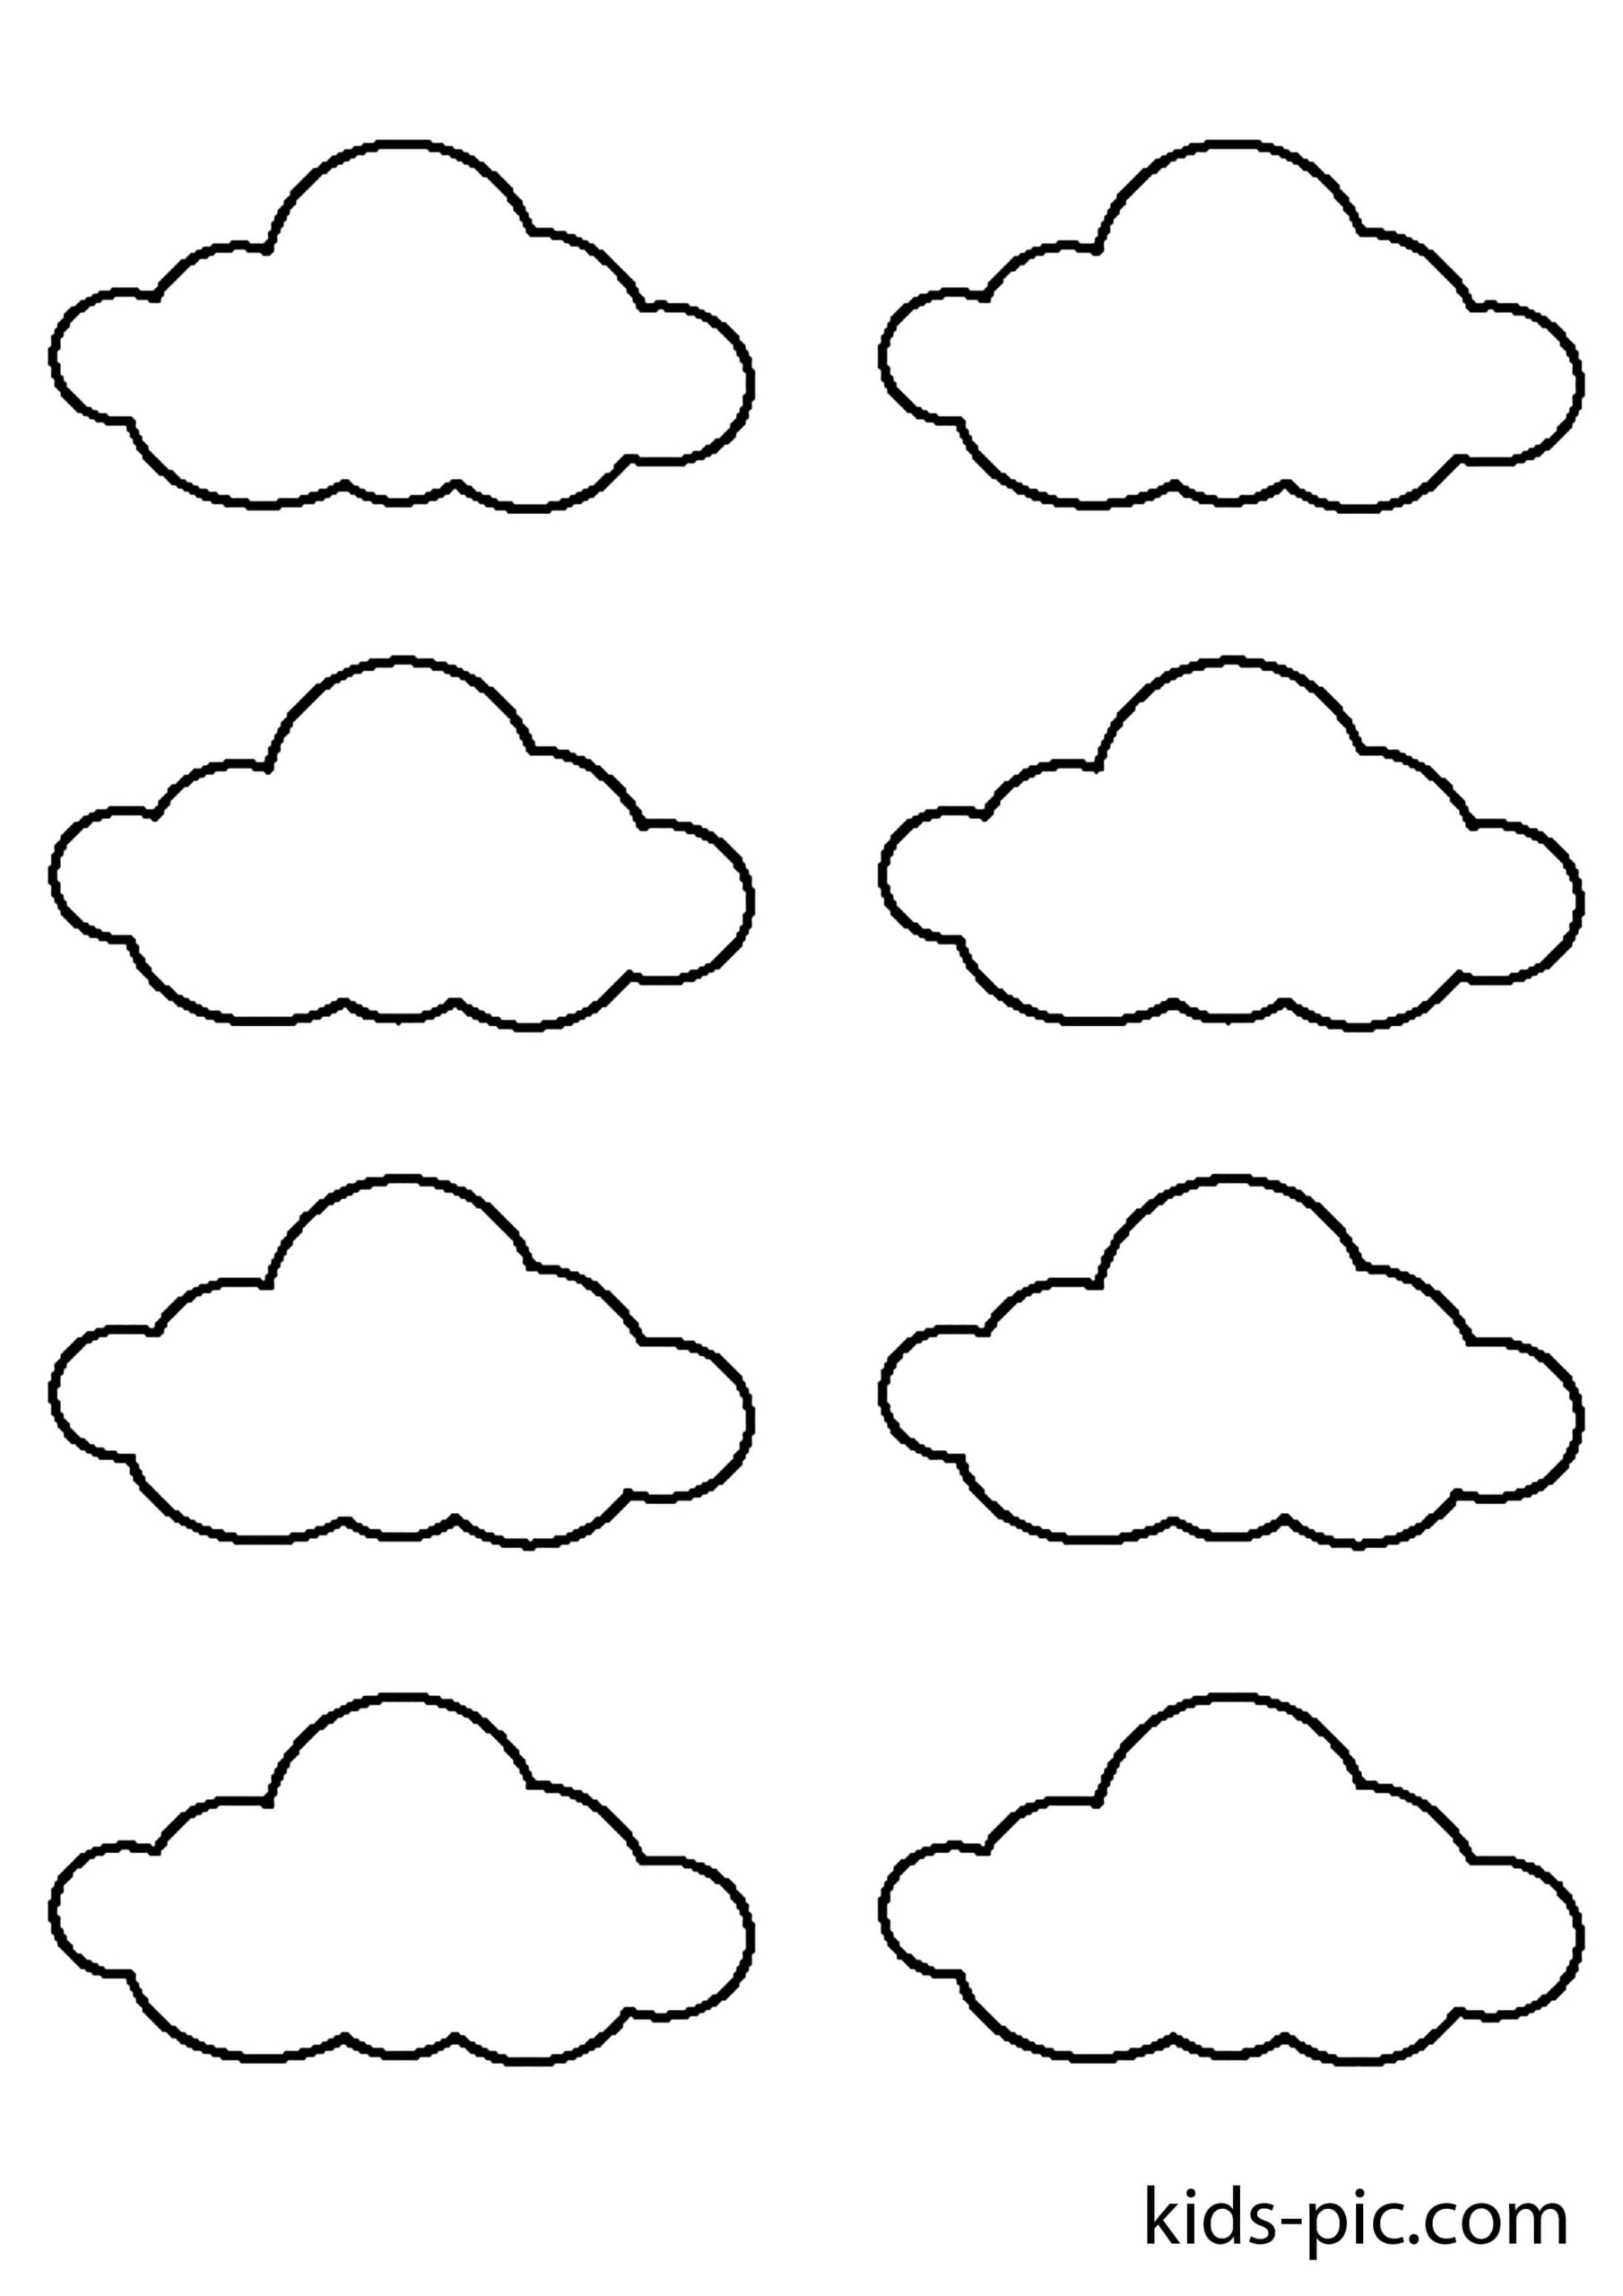 Cut Out Printable Cloud Template